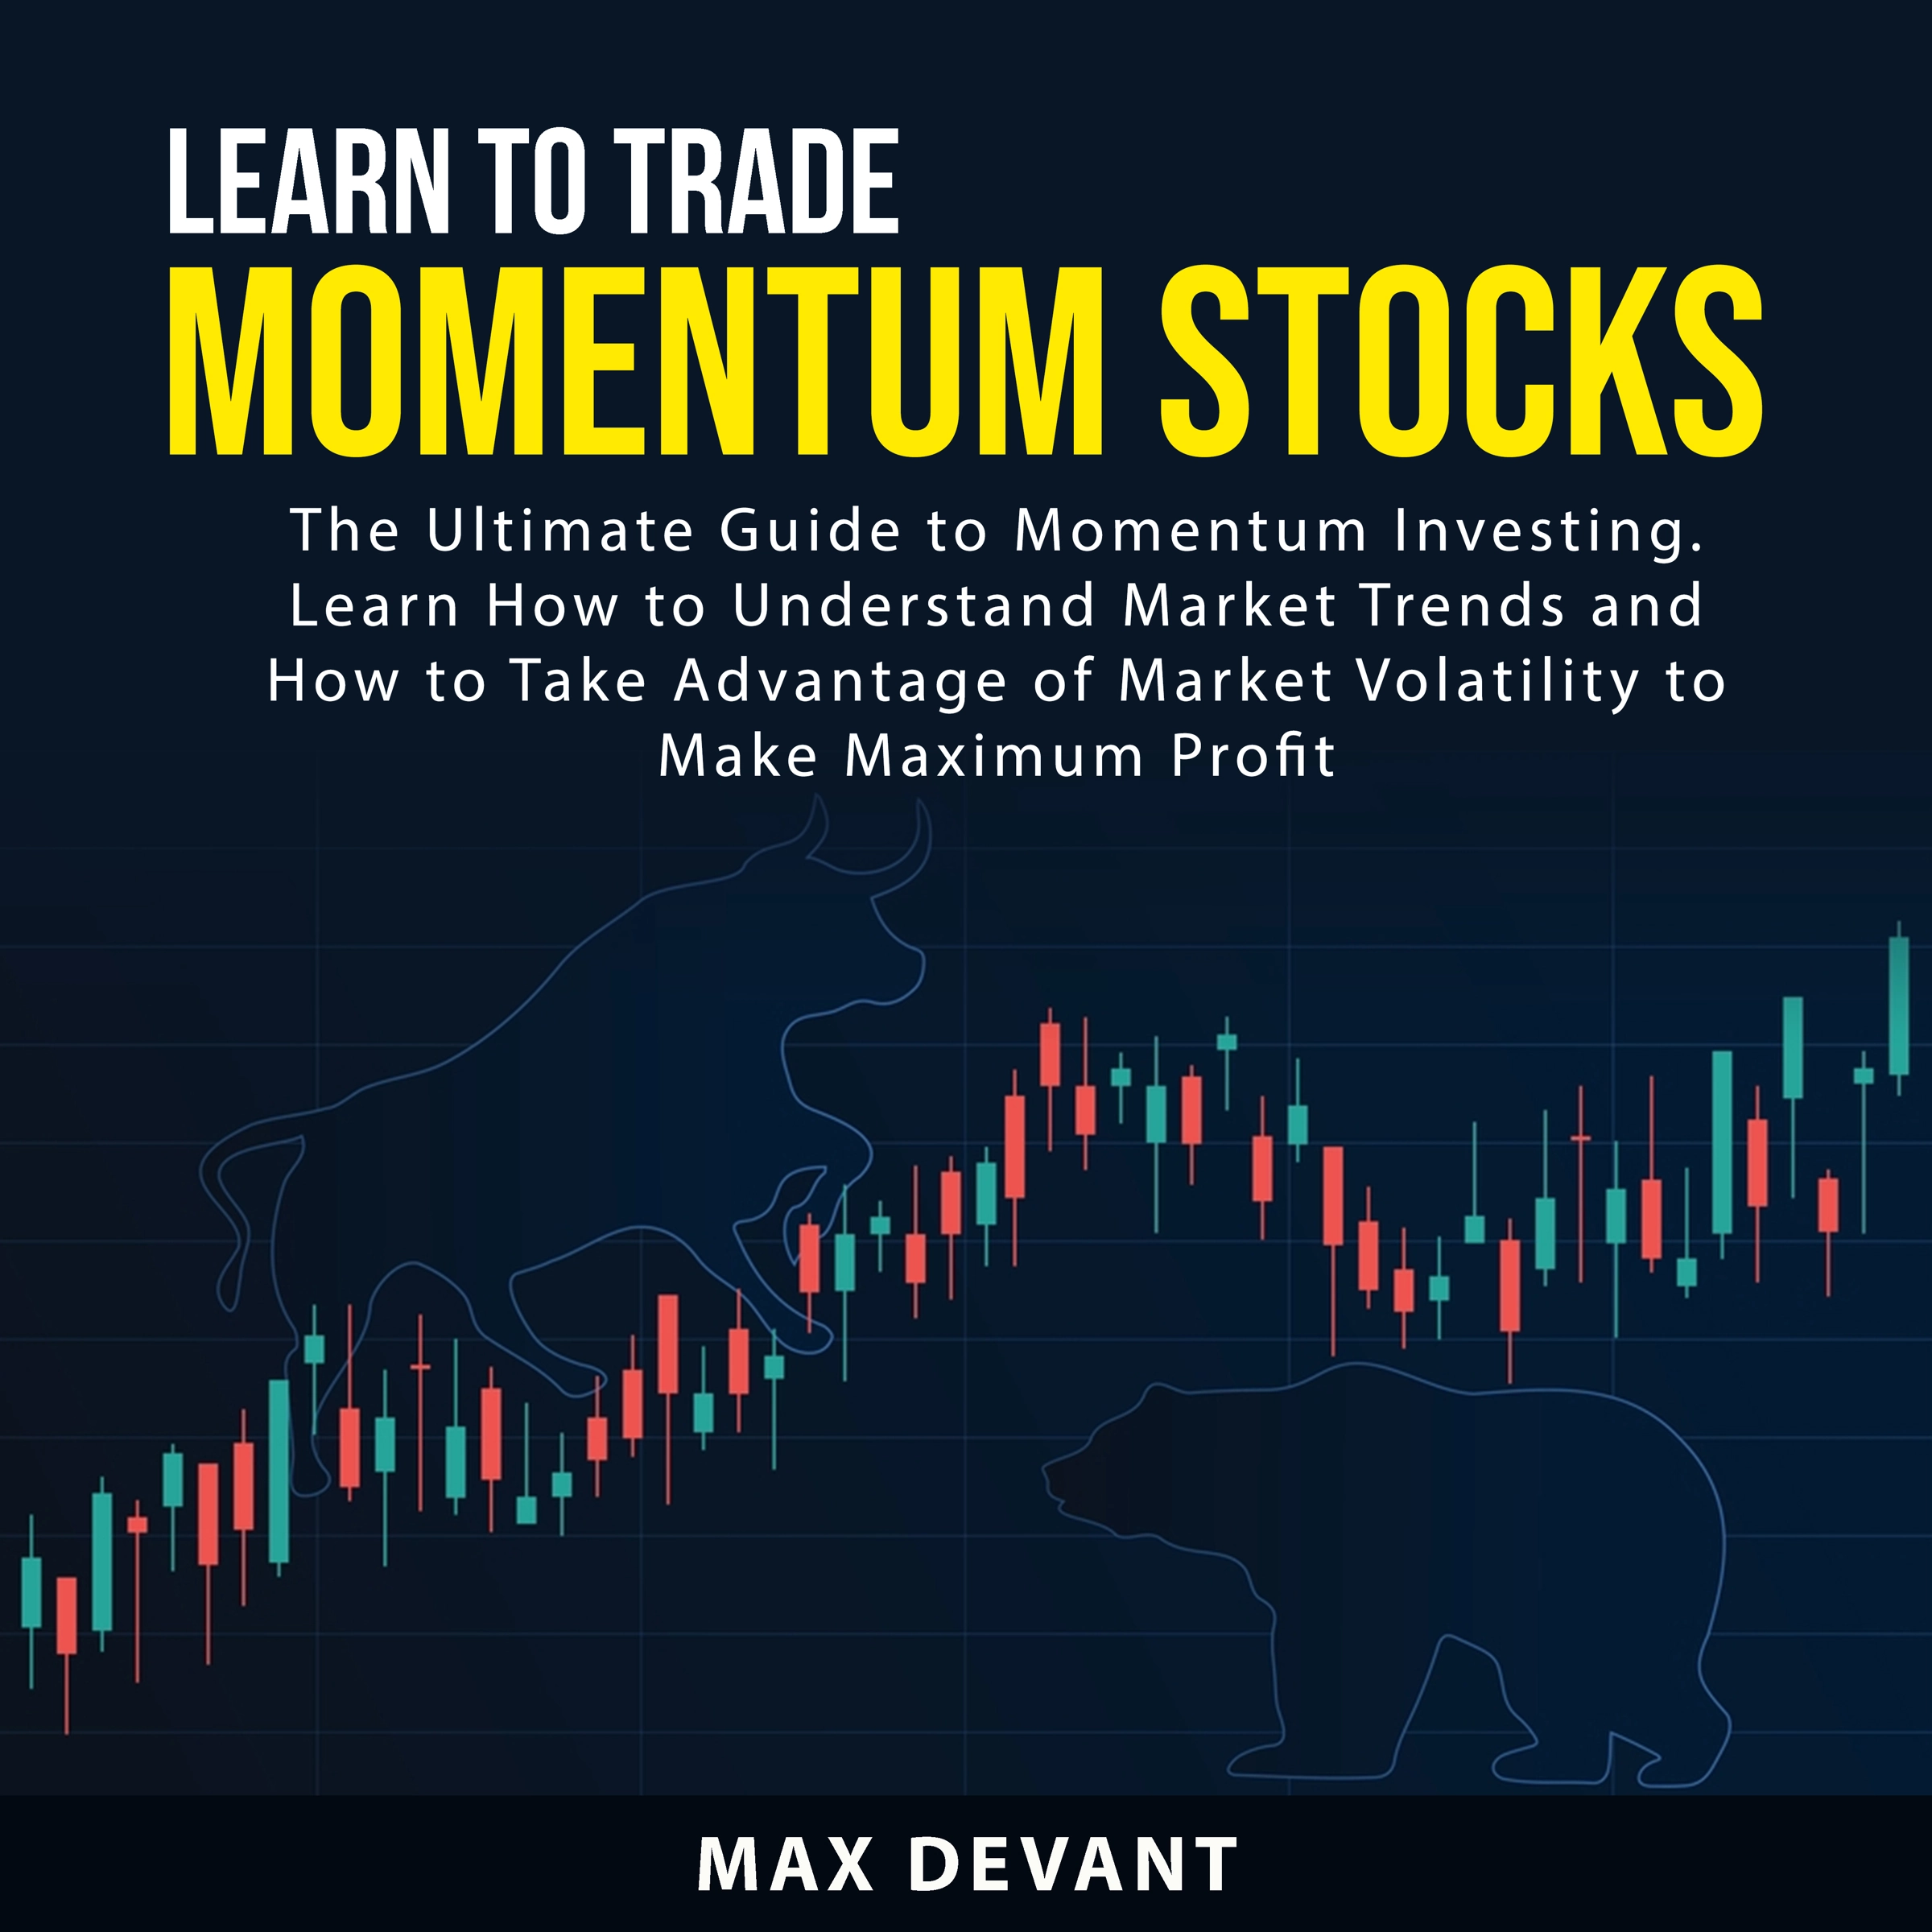 Learn to Trade Momentum Stocks by Max Devant Audiobook